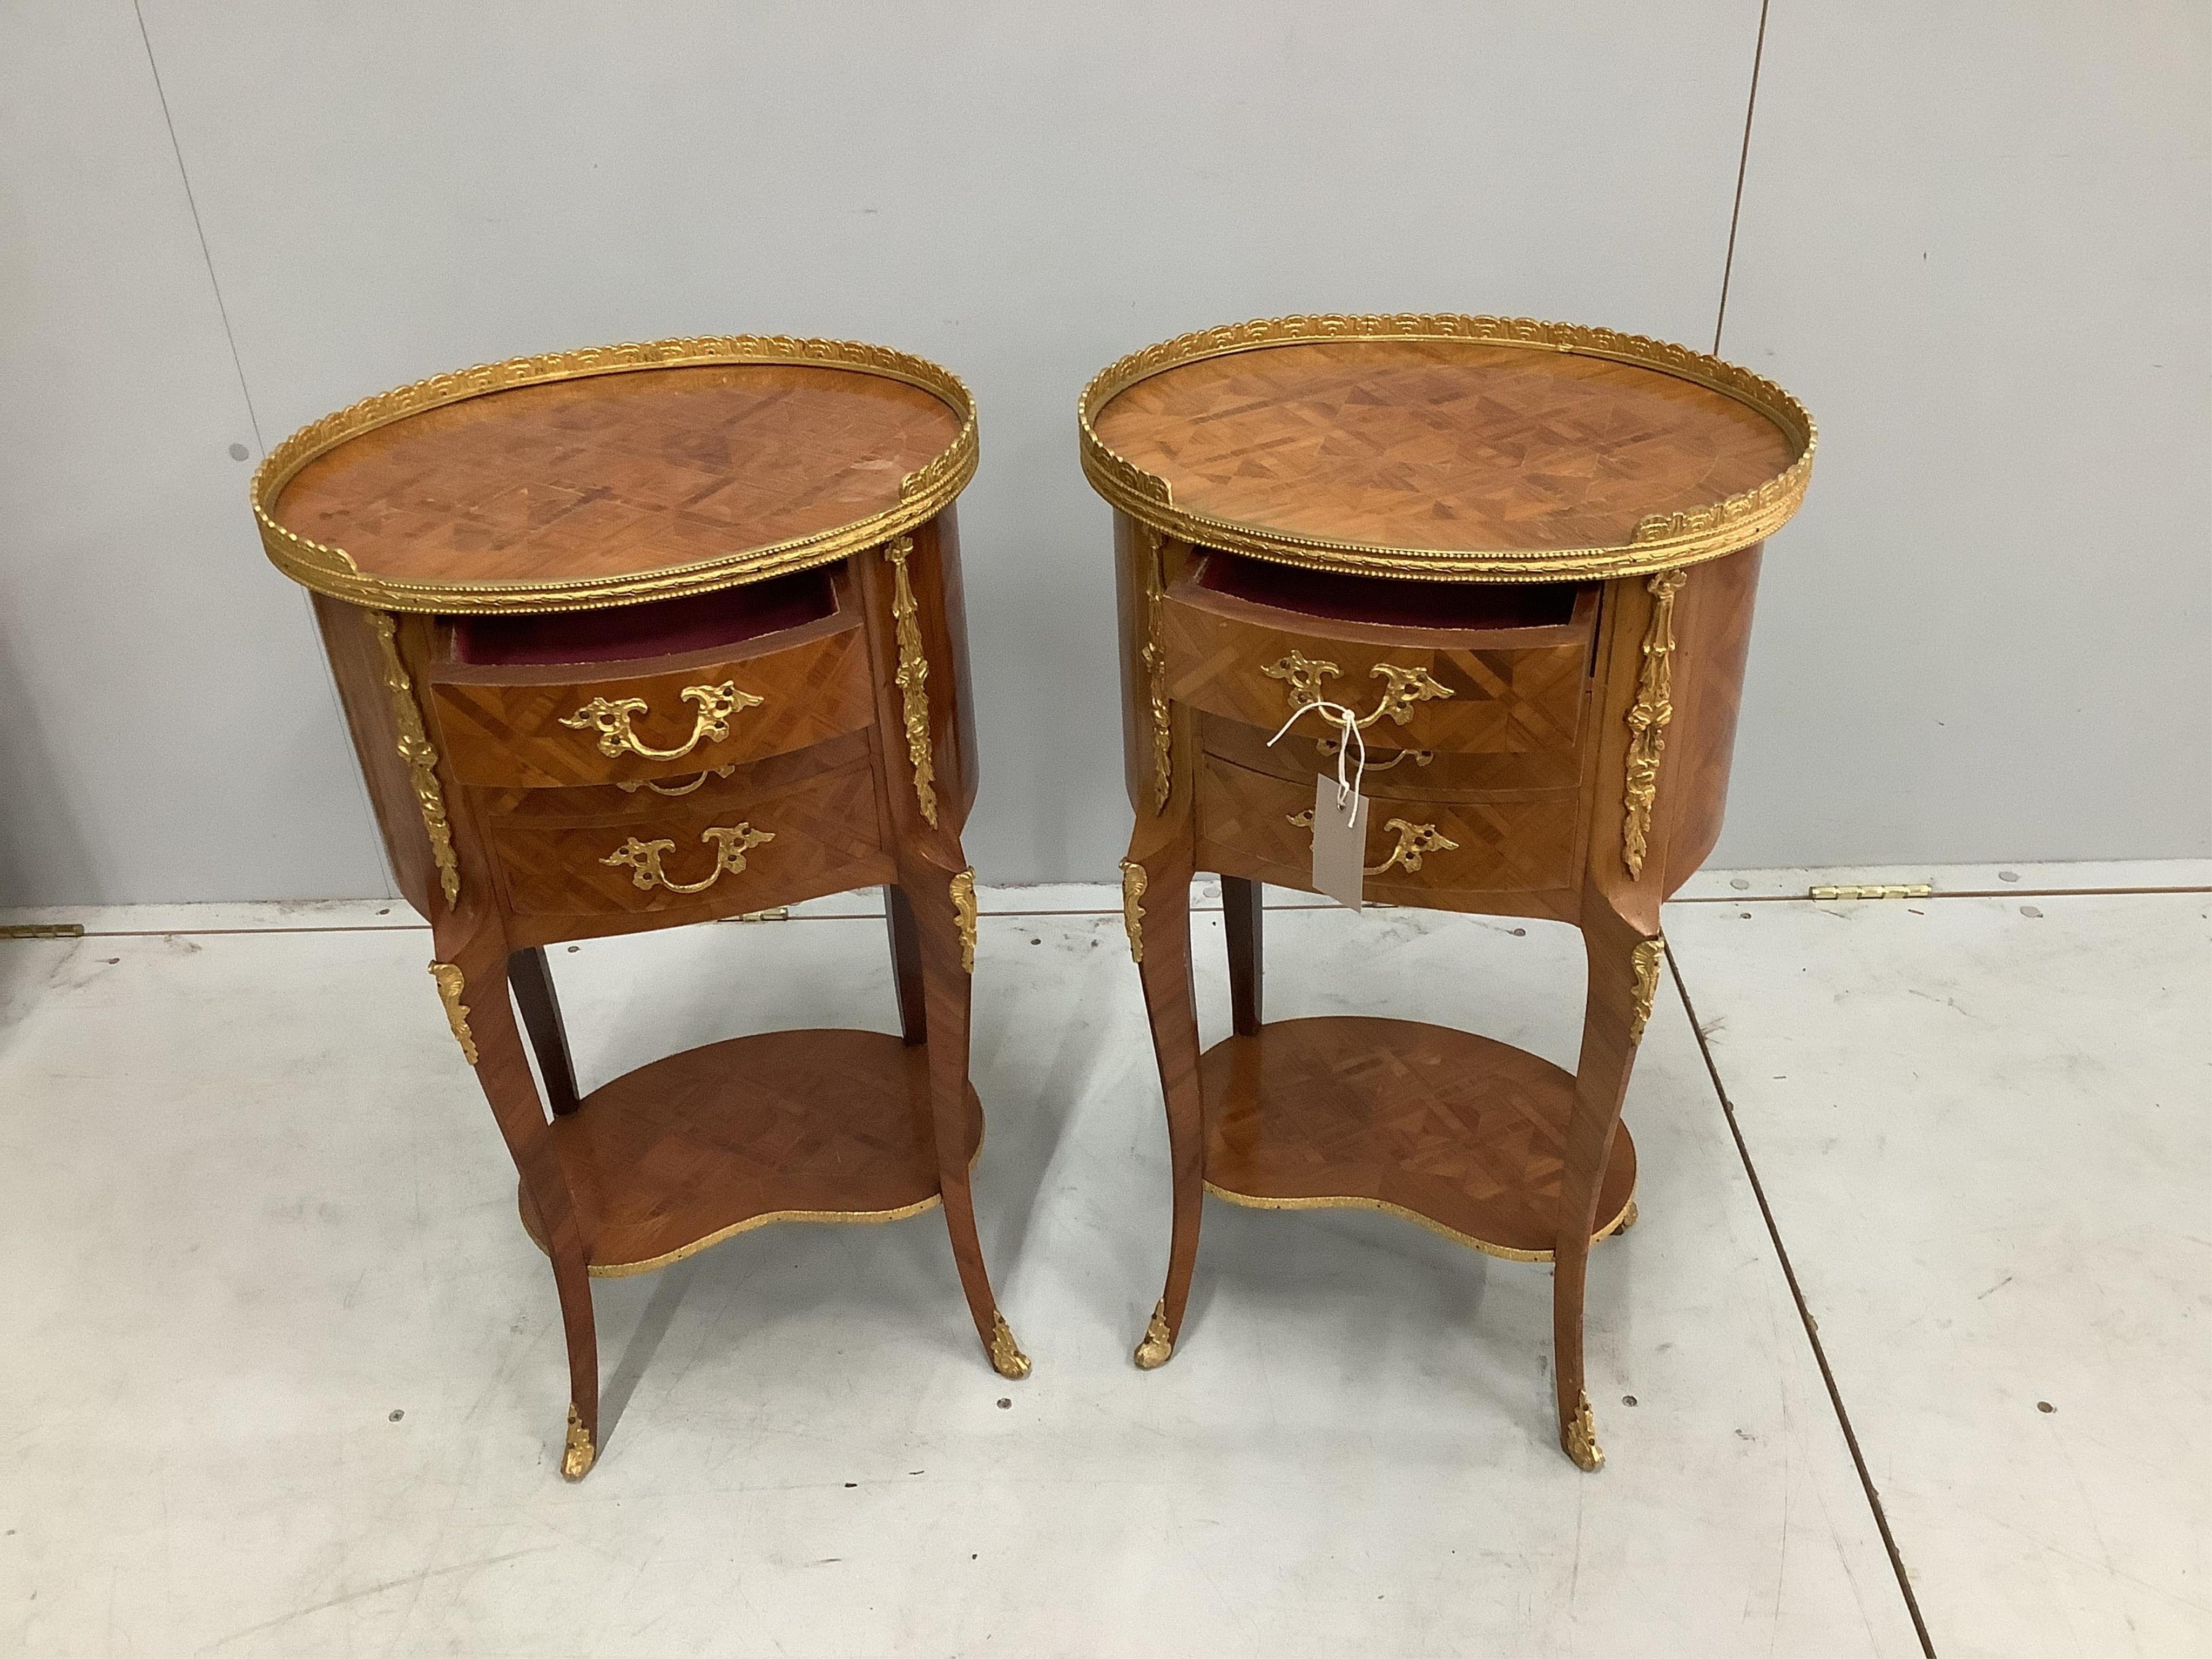 A pair of French transitional style gilt metal mounted kingwood oval three drawer bedside chests, width 40cm, depth 30cm, height 69cm